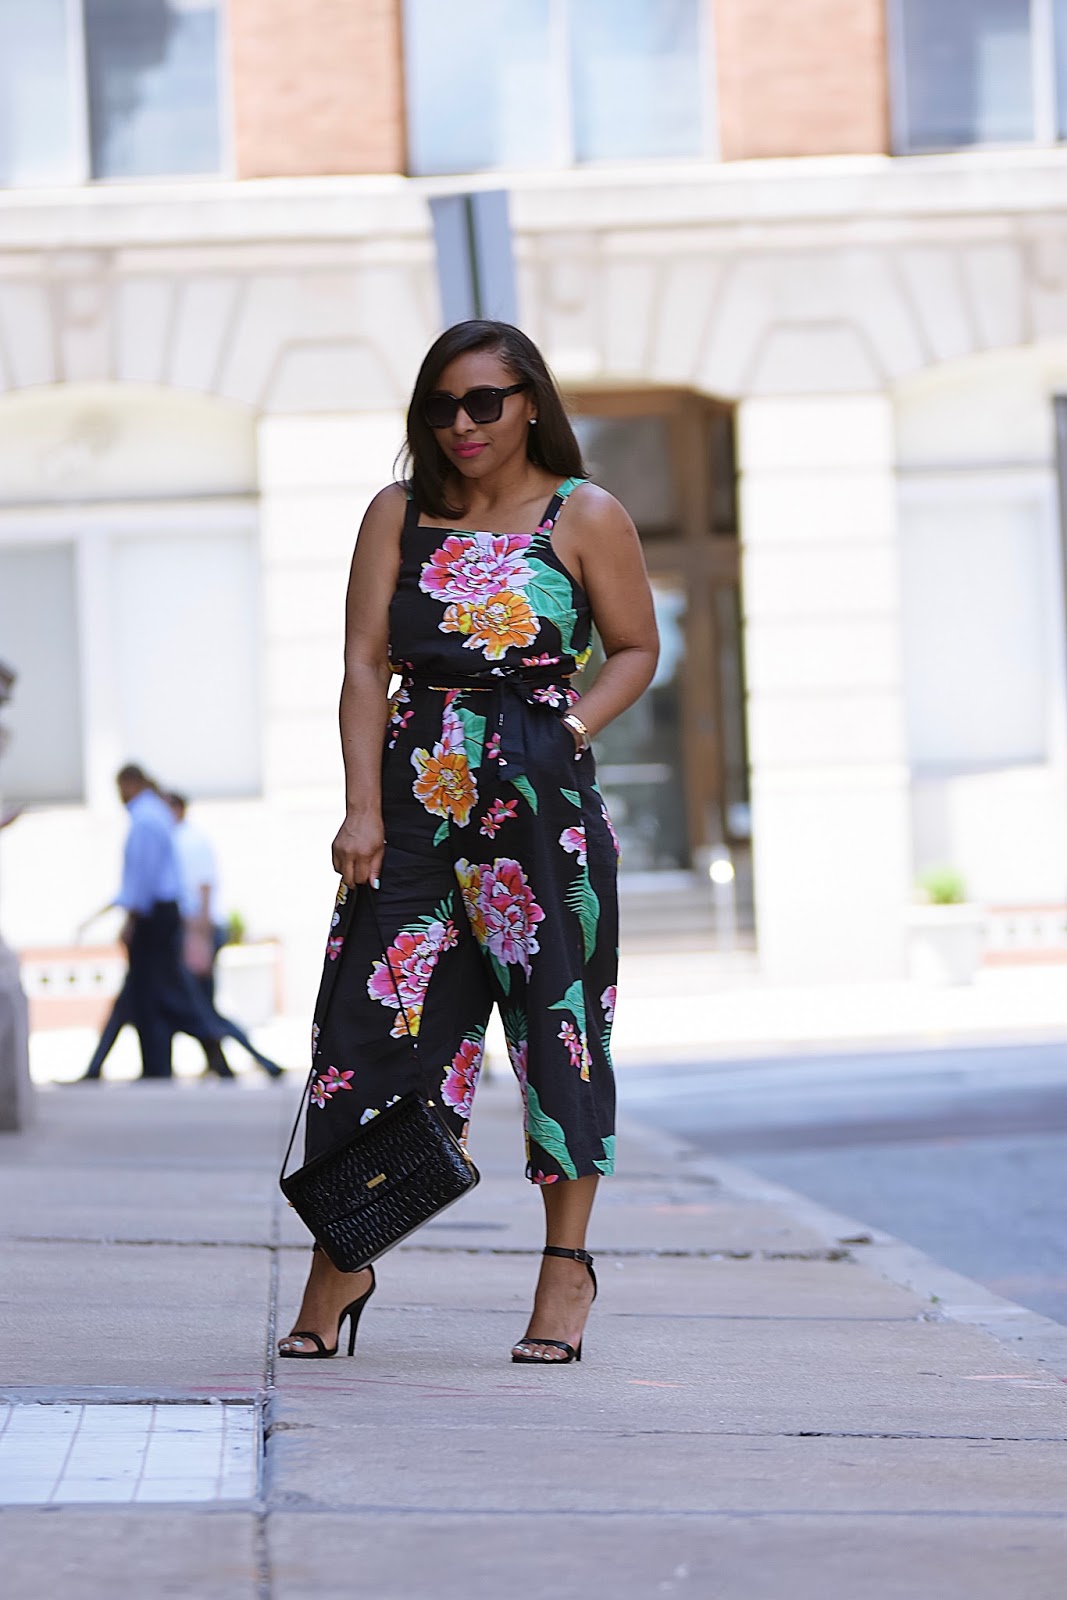 Summer Vibes Black Floral Jumpsuit, old navy, tropical prints, summer outfit ideas, baltimore, old navy style, ankle strap heels, linen jumpsuit, summer styles, romper, details, dc bloggers, walking in street, floral print, summer looks